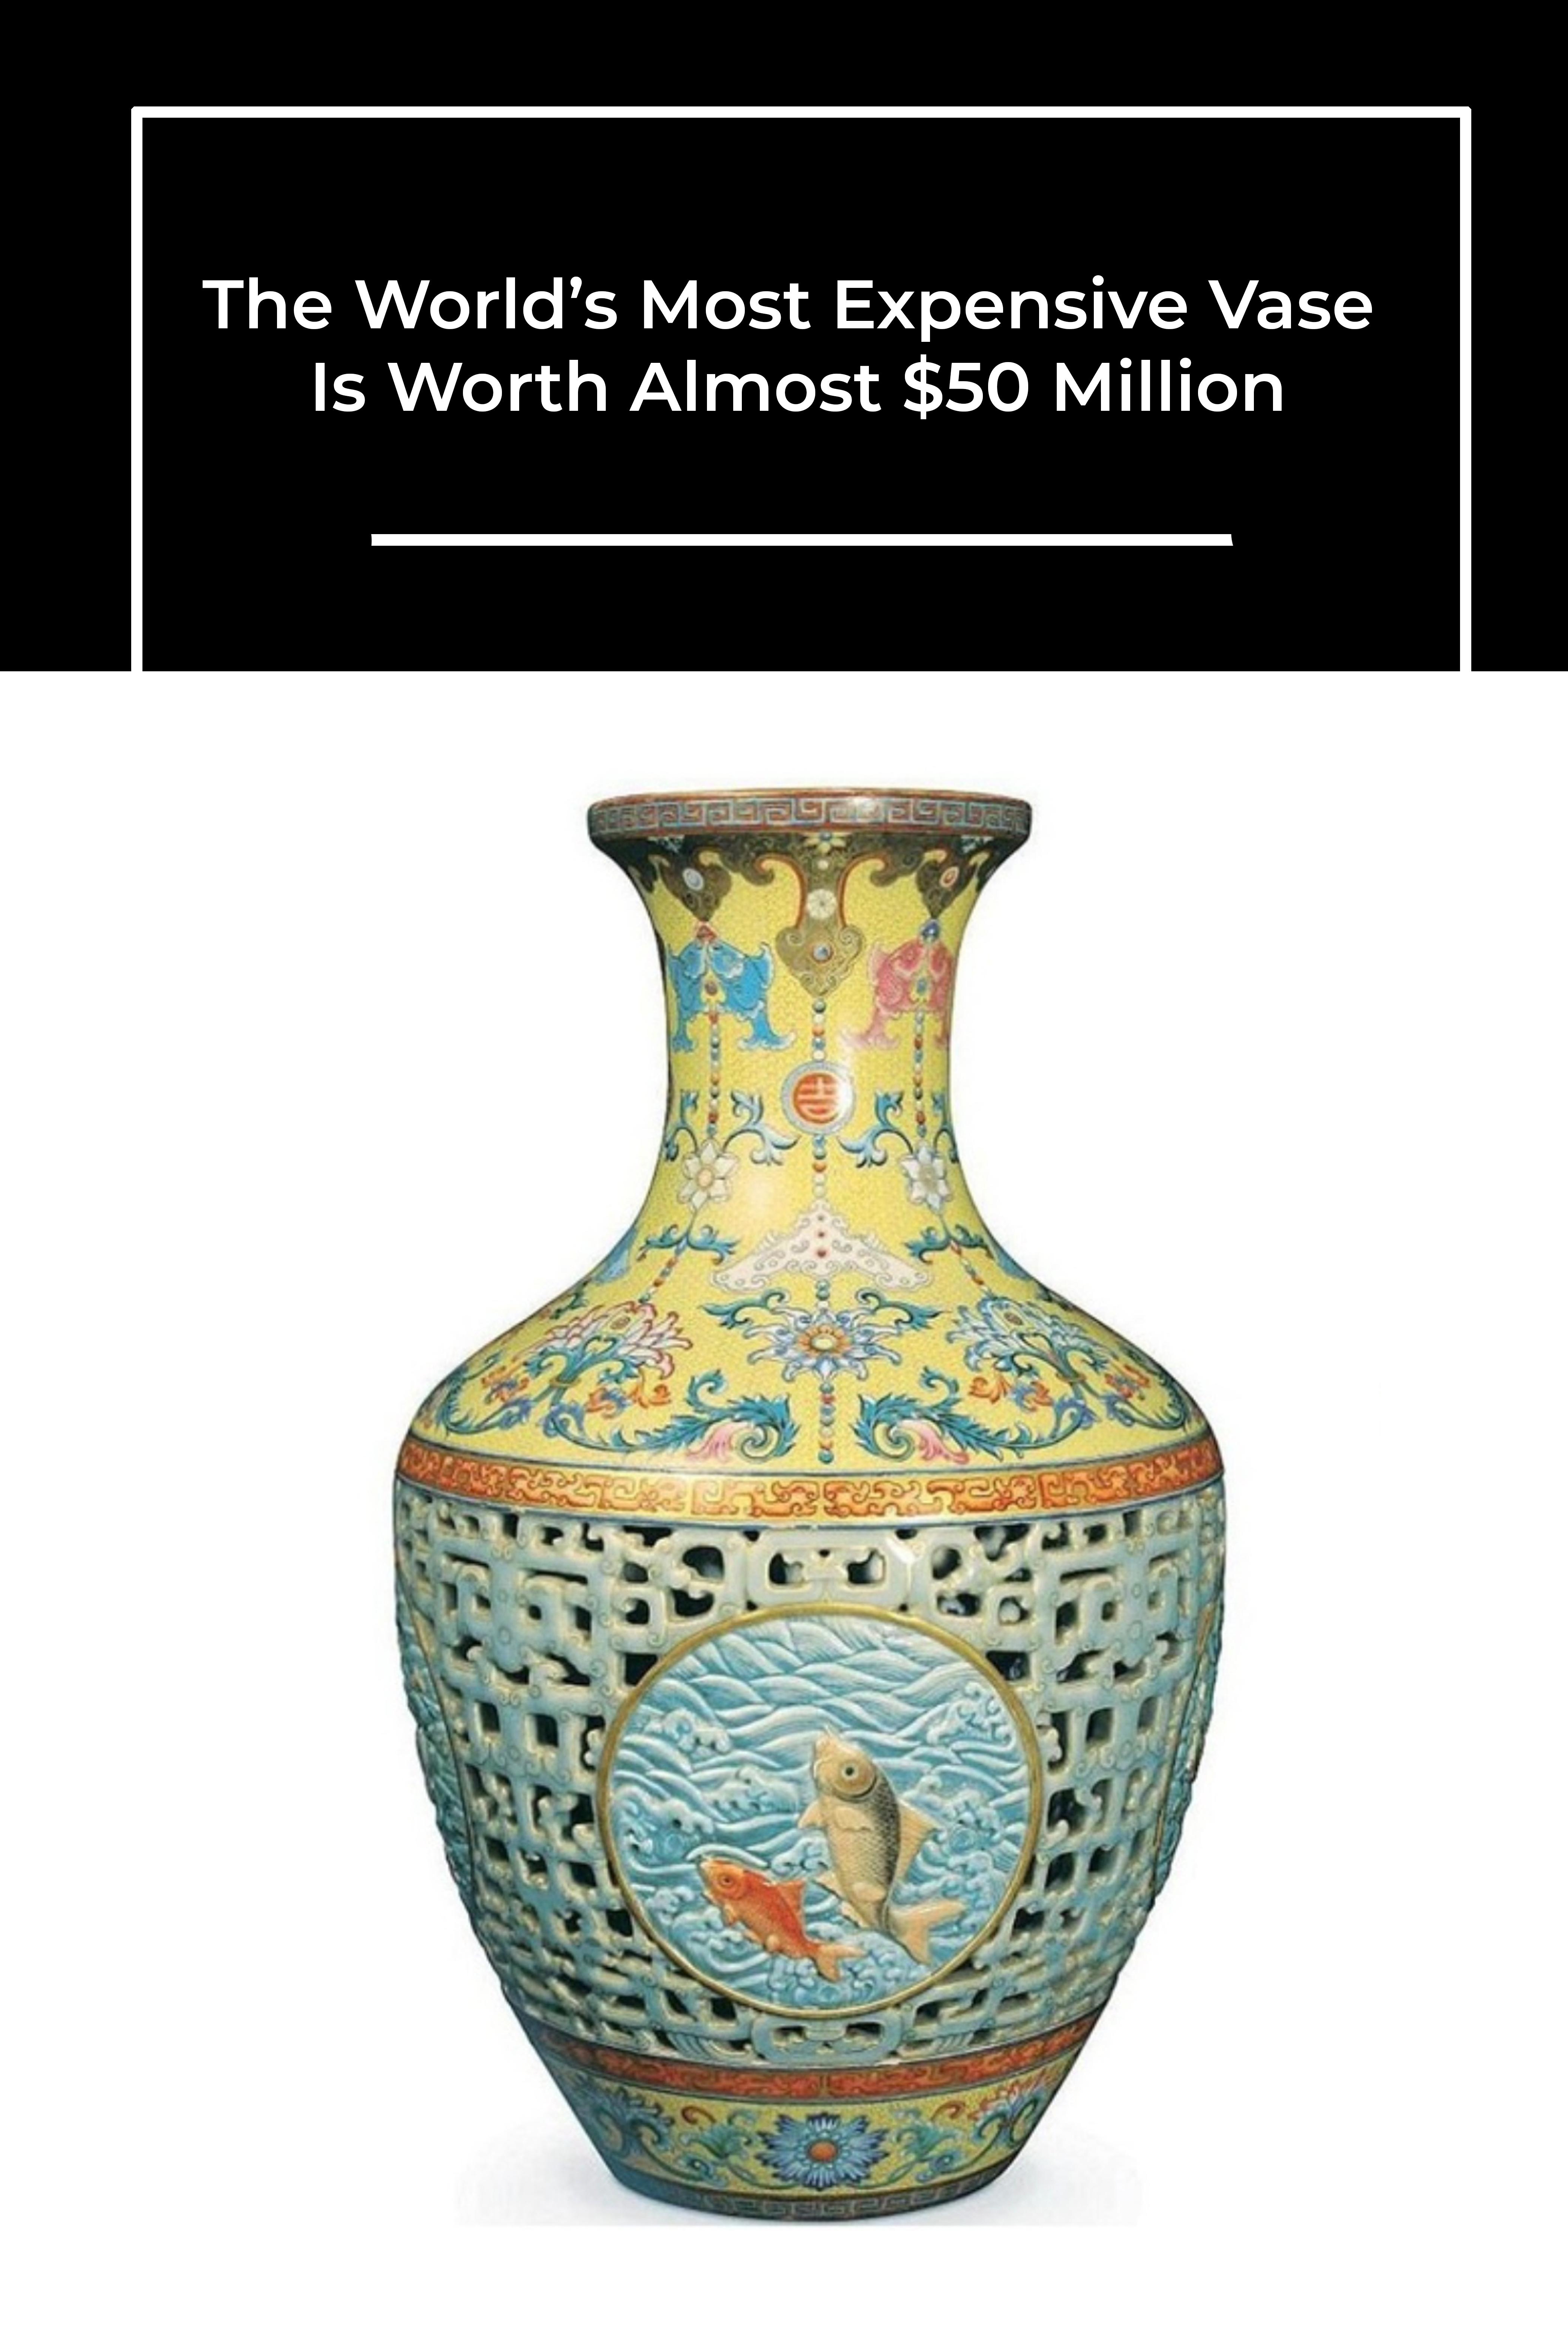 Most Vases in the World | Work +